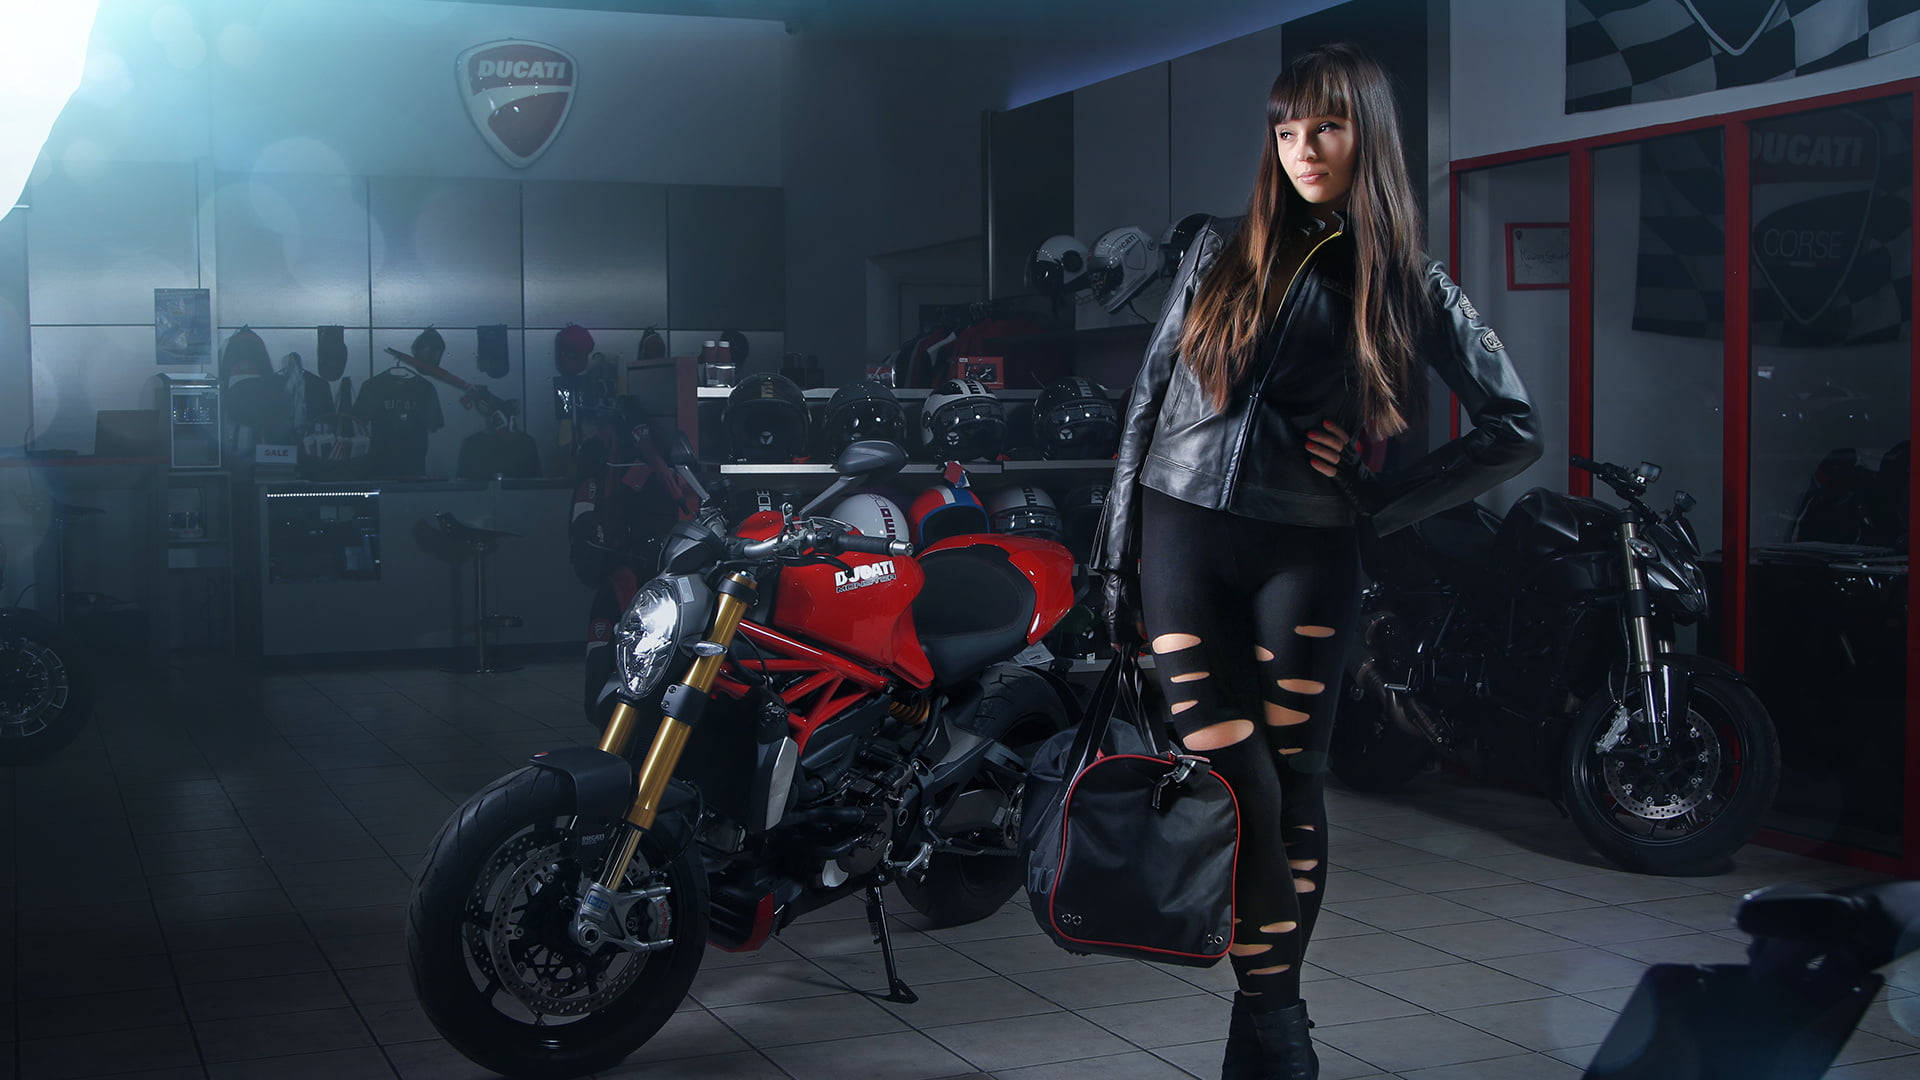 High-octane Style - Get All The Latest Gear At A Ducati Store Background